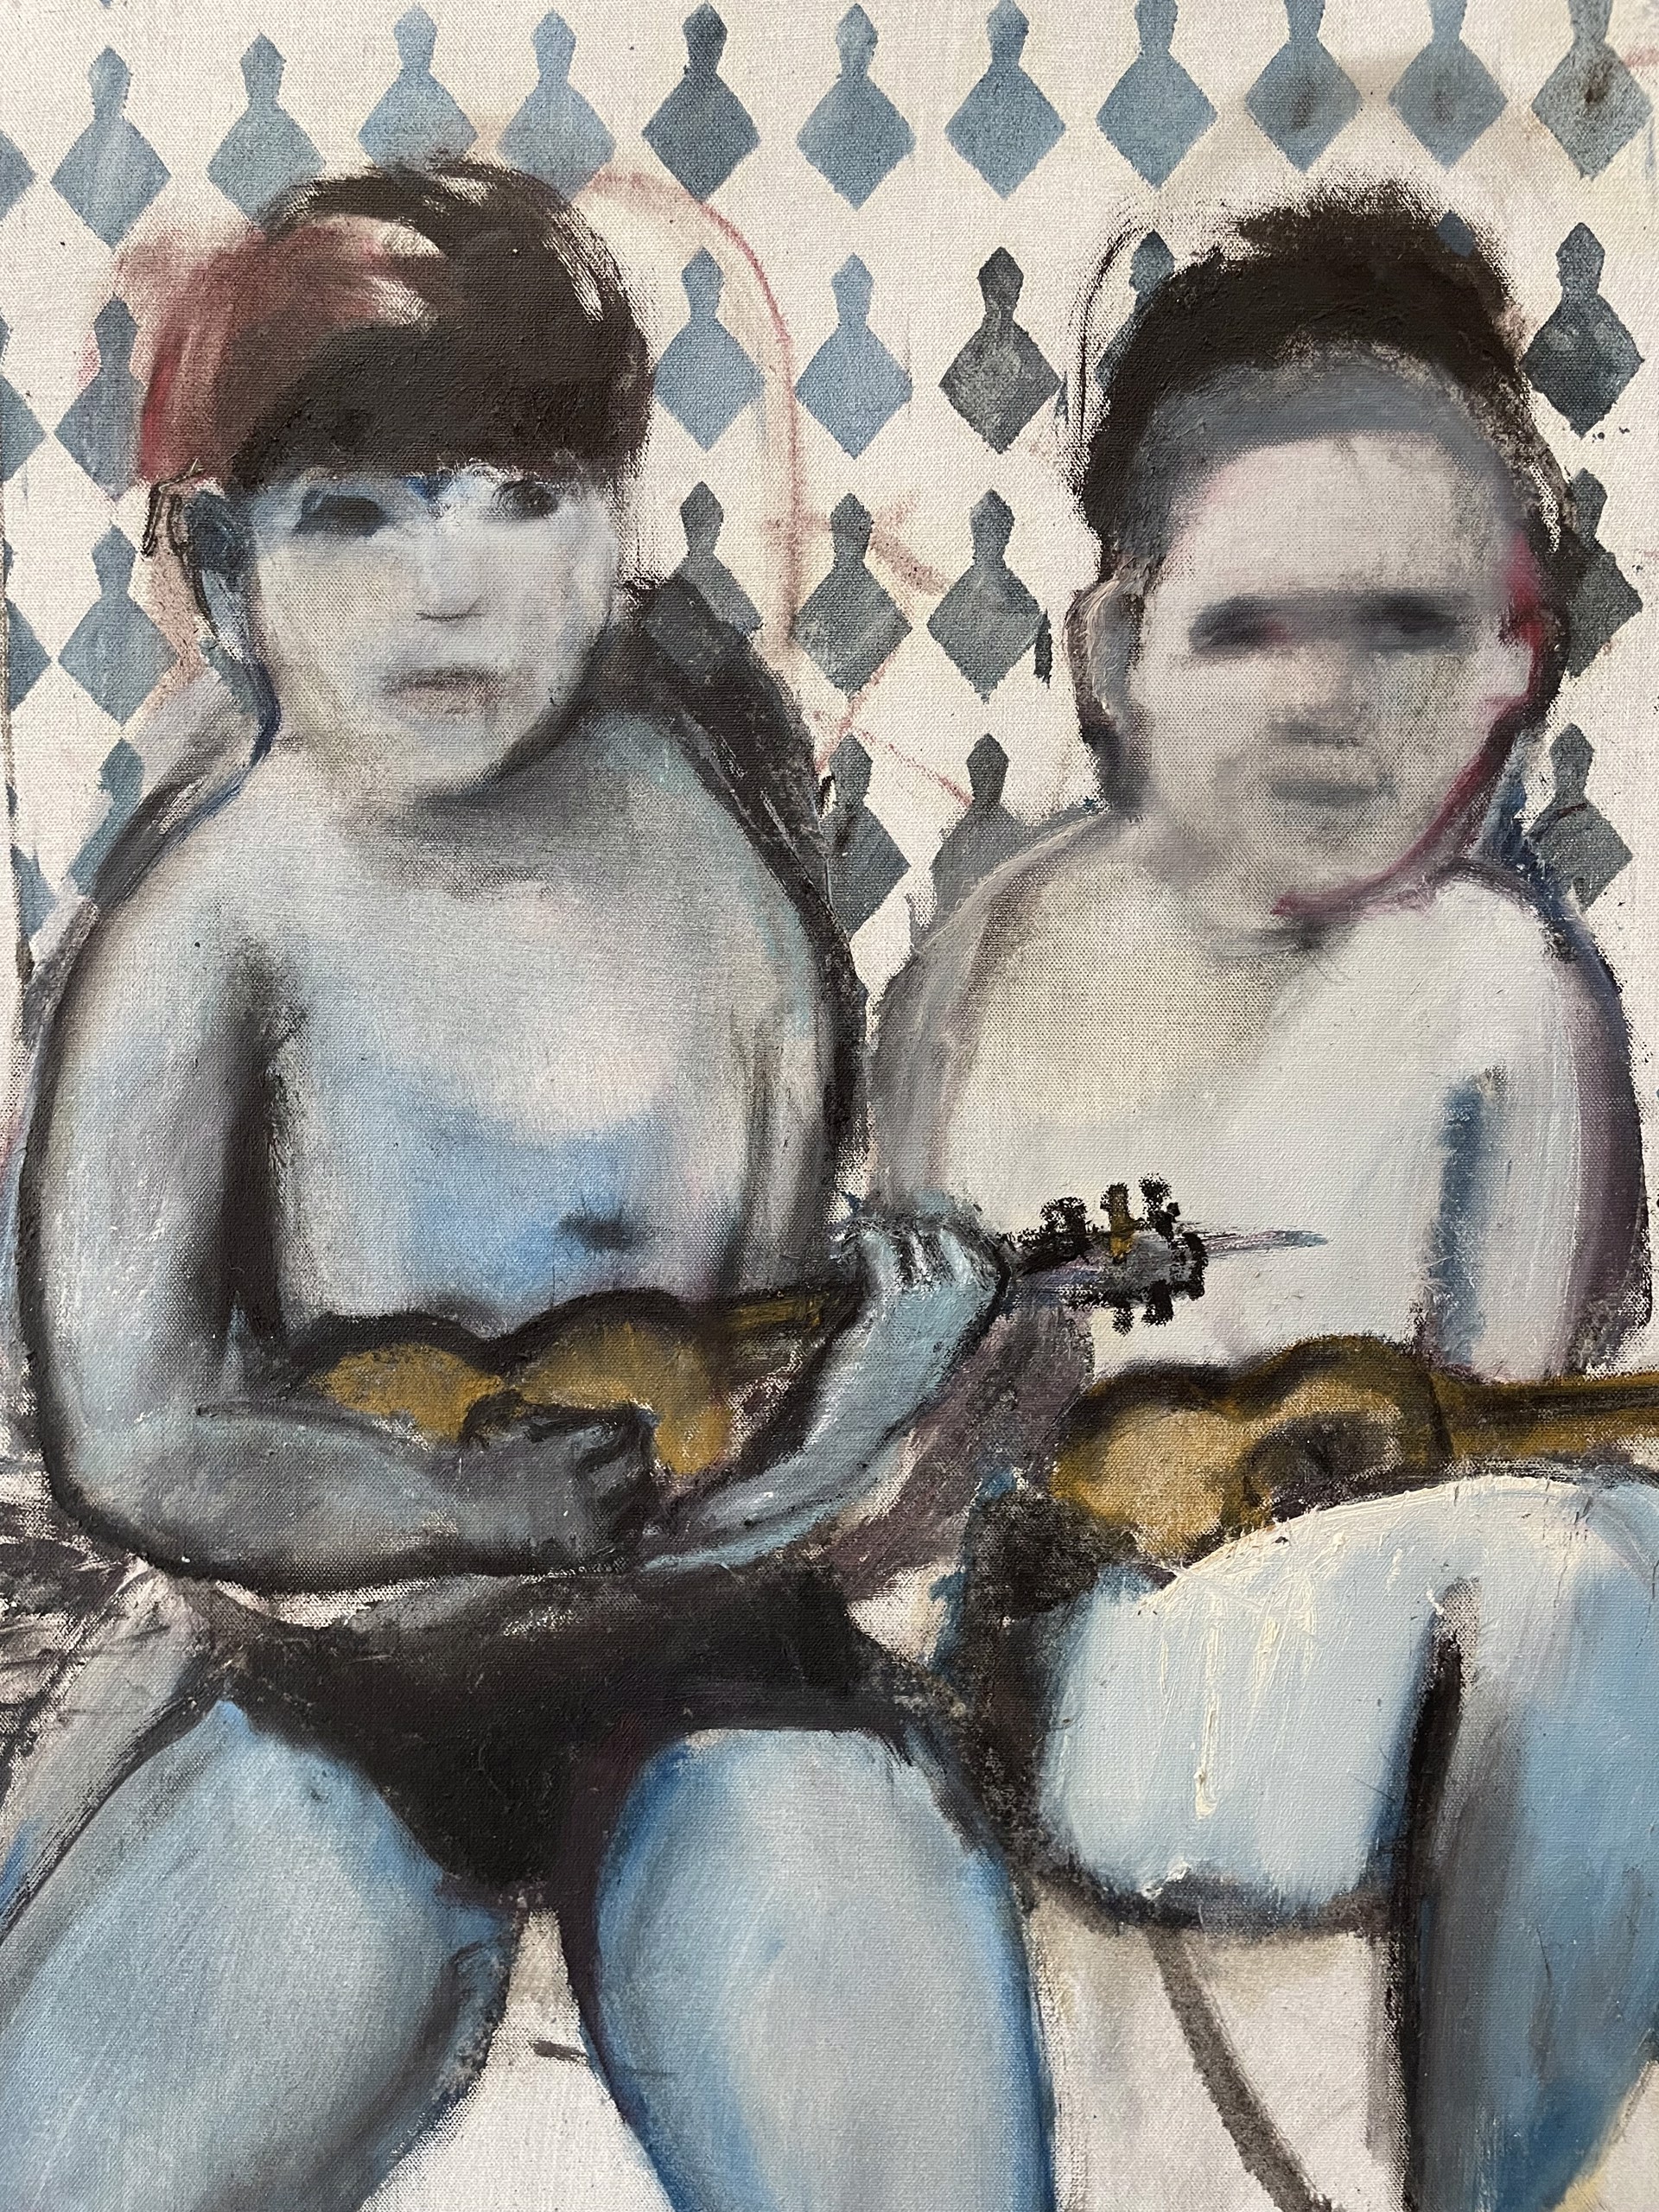 PLAYING THE SAME OLD TUNES by CHRISTINA THWAITES (Figures)